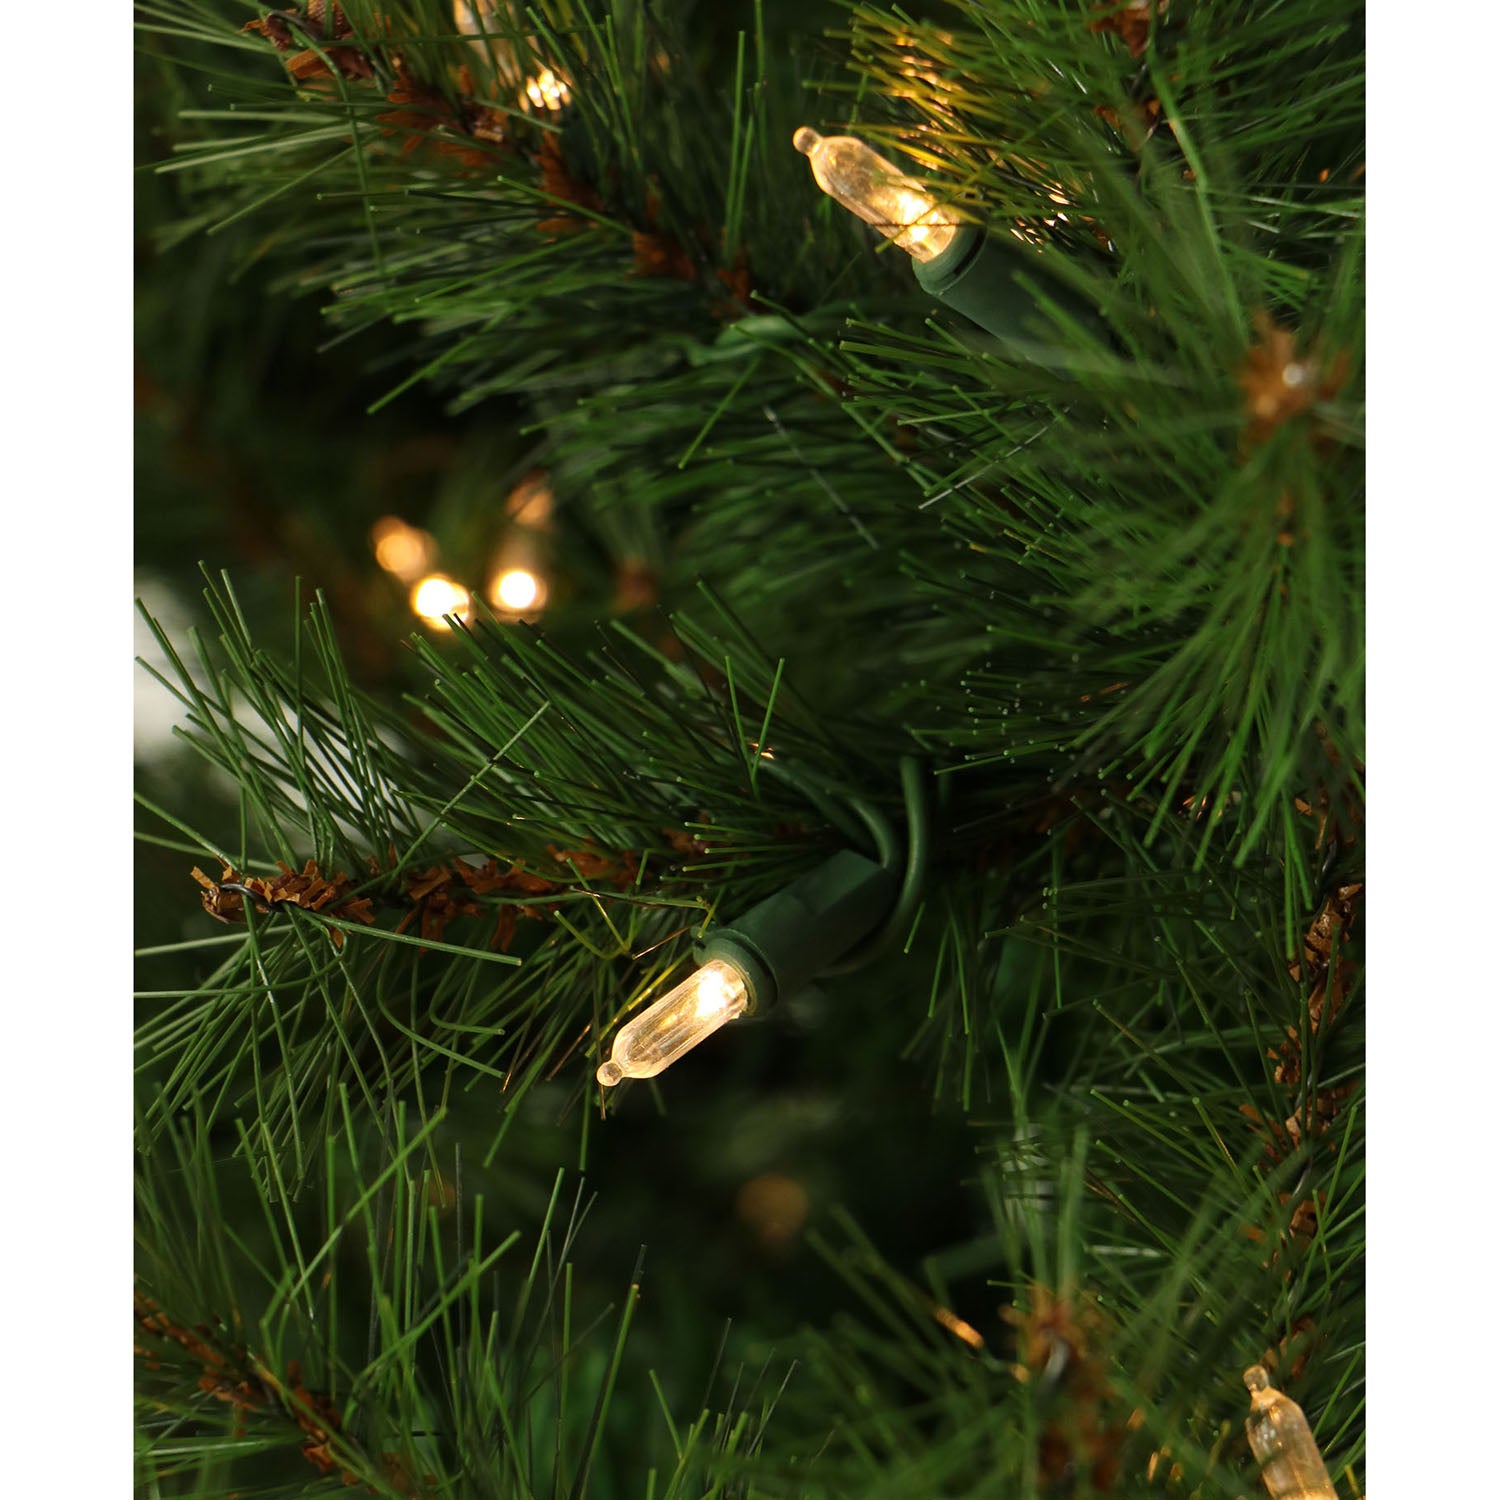 Christmas Time -  6.5-Ft. Colorado Pine Artificial Christmas Tree with Clear Smart String Lighting